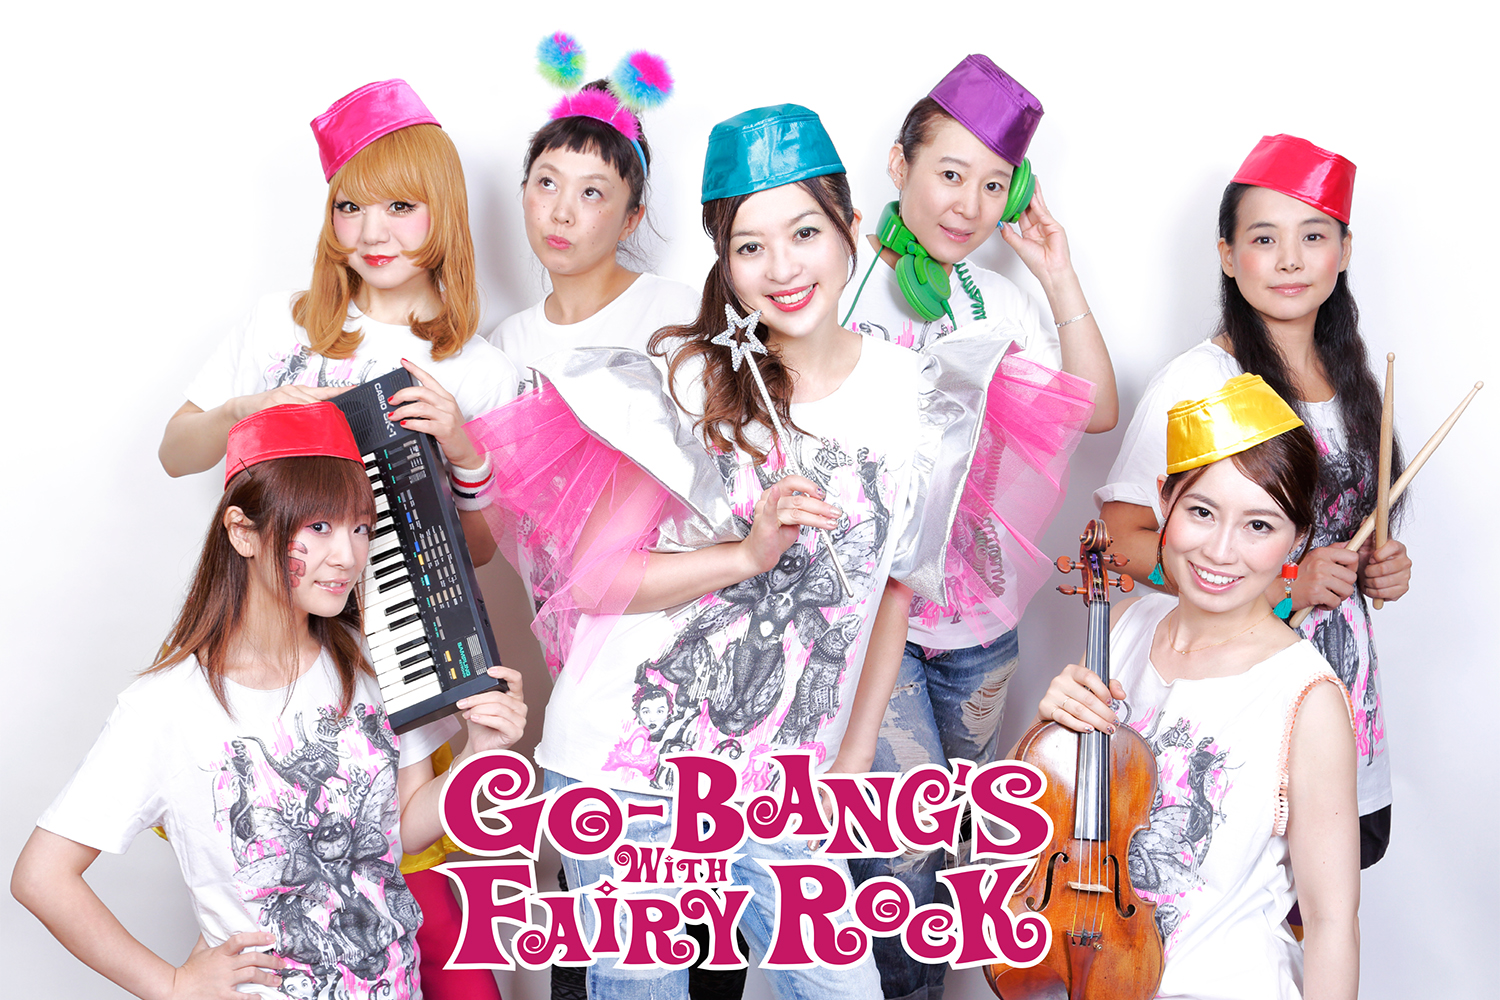 http://rooftop.cc/news/2015/11/09/GO-BANG%27S%20with%20Fairy%20Rock2-2.jpg